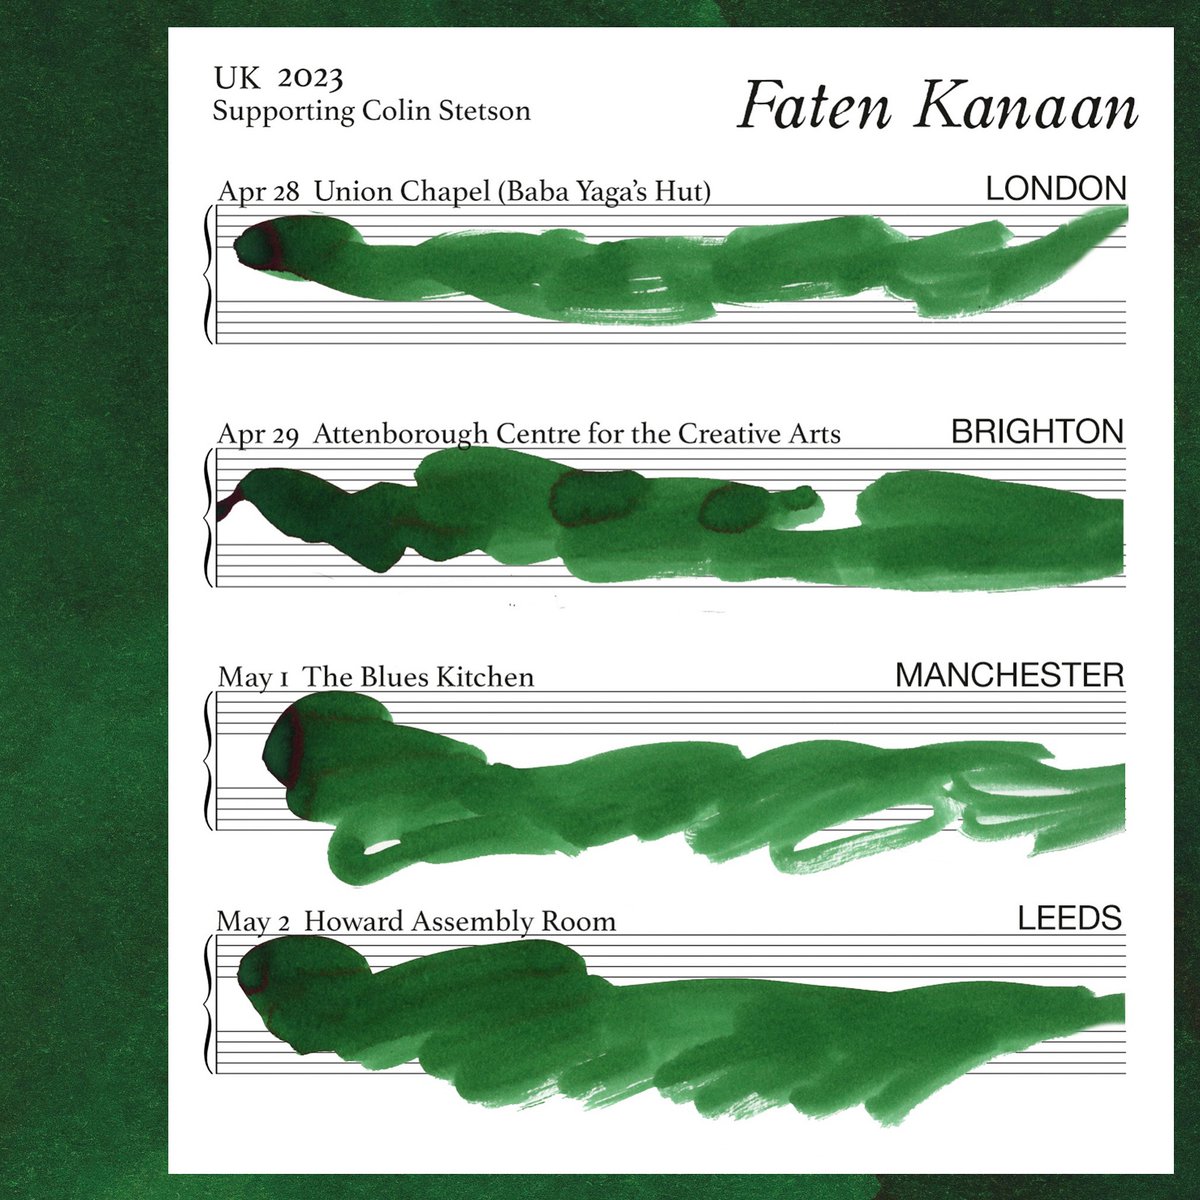 #FatenKanaan will be supporting @colinstetson's UK tour this Spring 🌳 She will be playing music from her new album ‘Afterpoem' out now. Info & tickets at fatenkanaan.com/live